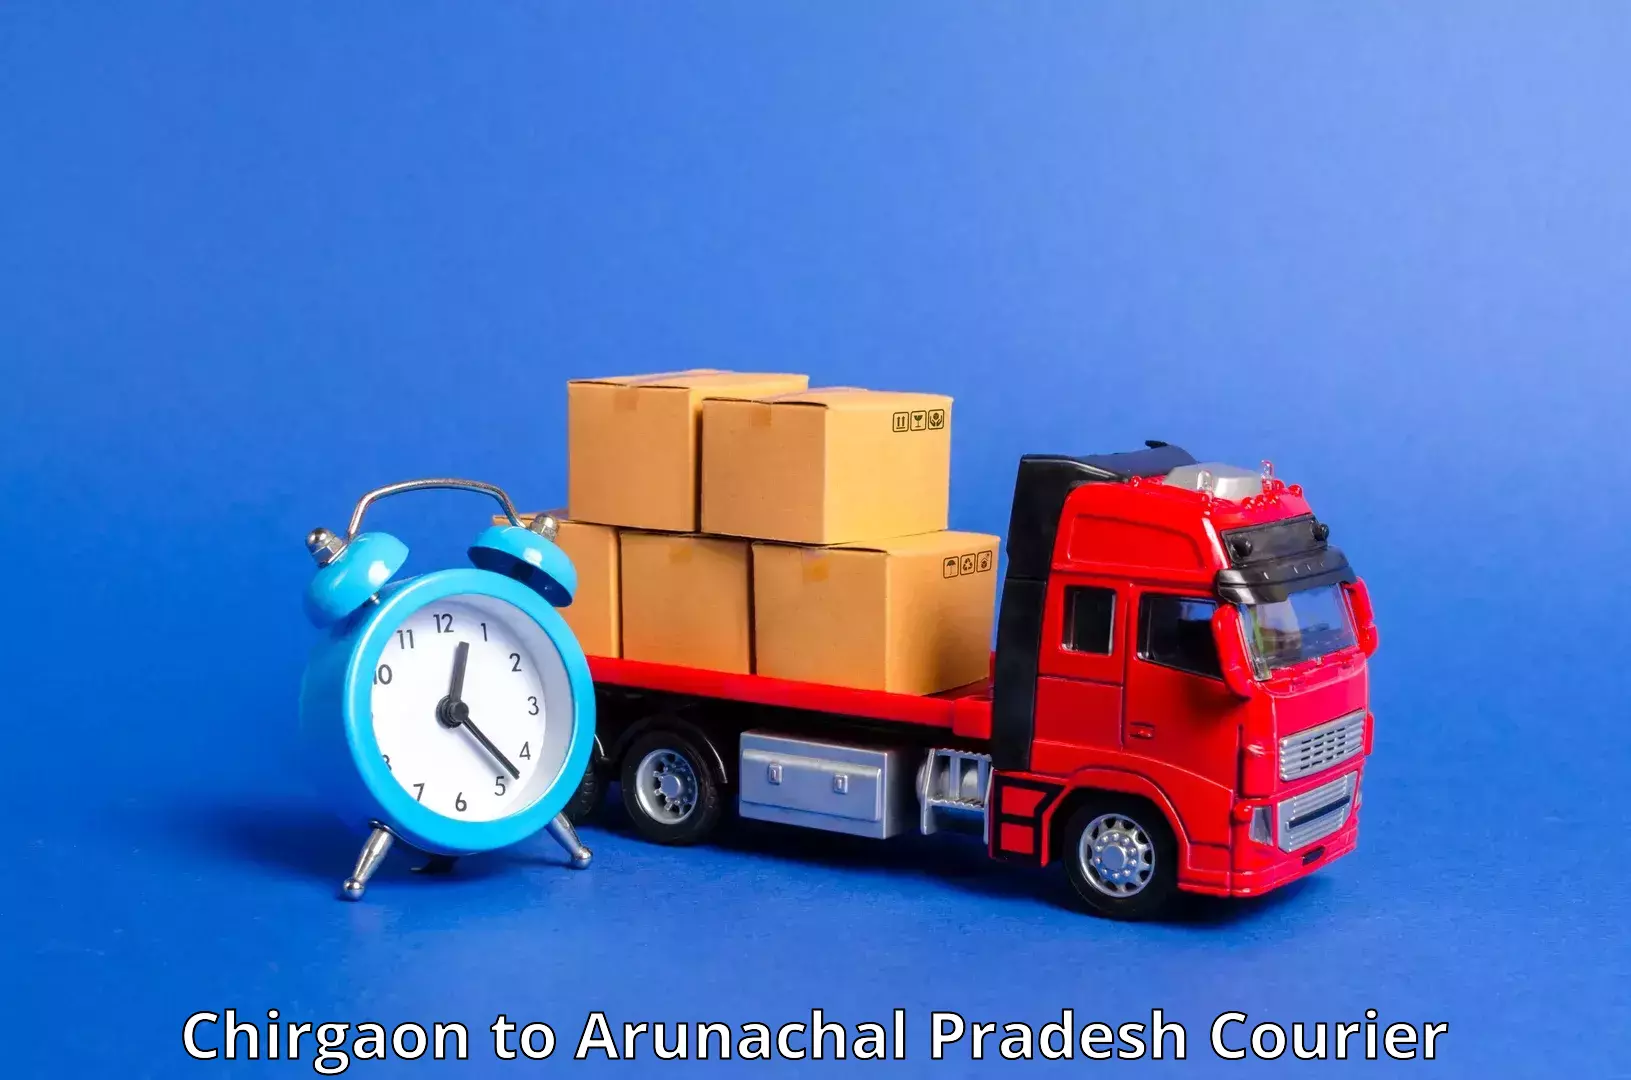 Delivery service partnership Chirgaon to Jairampur